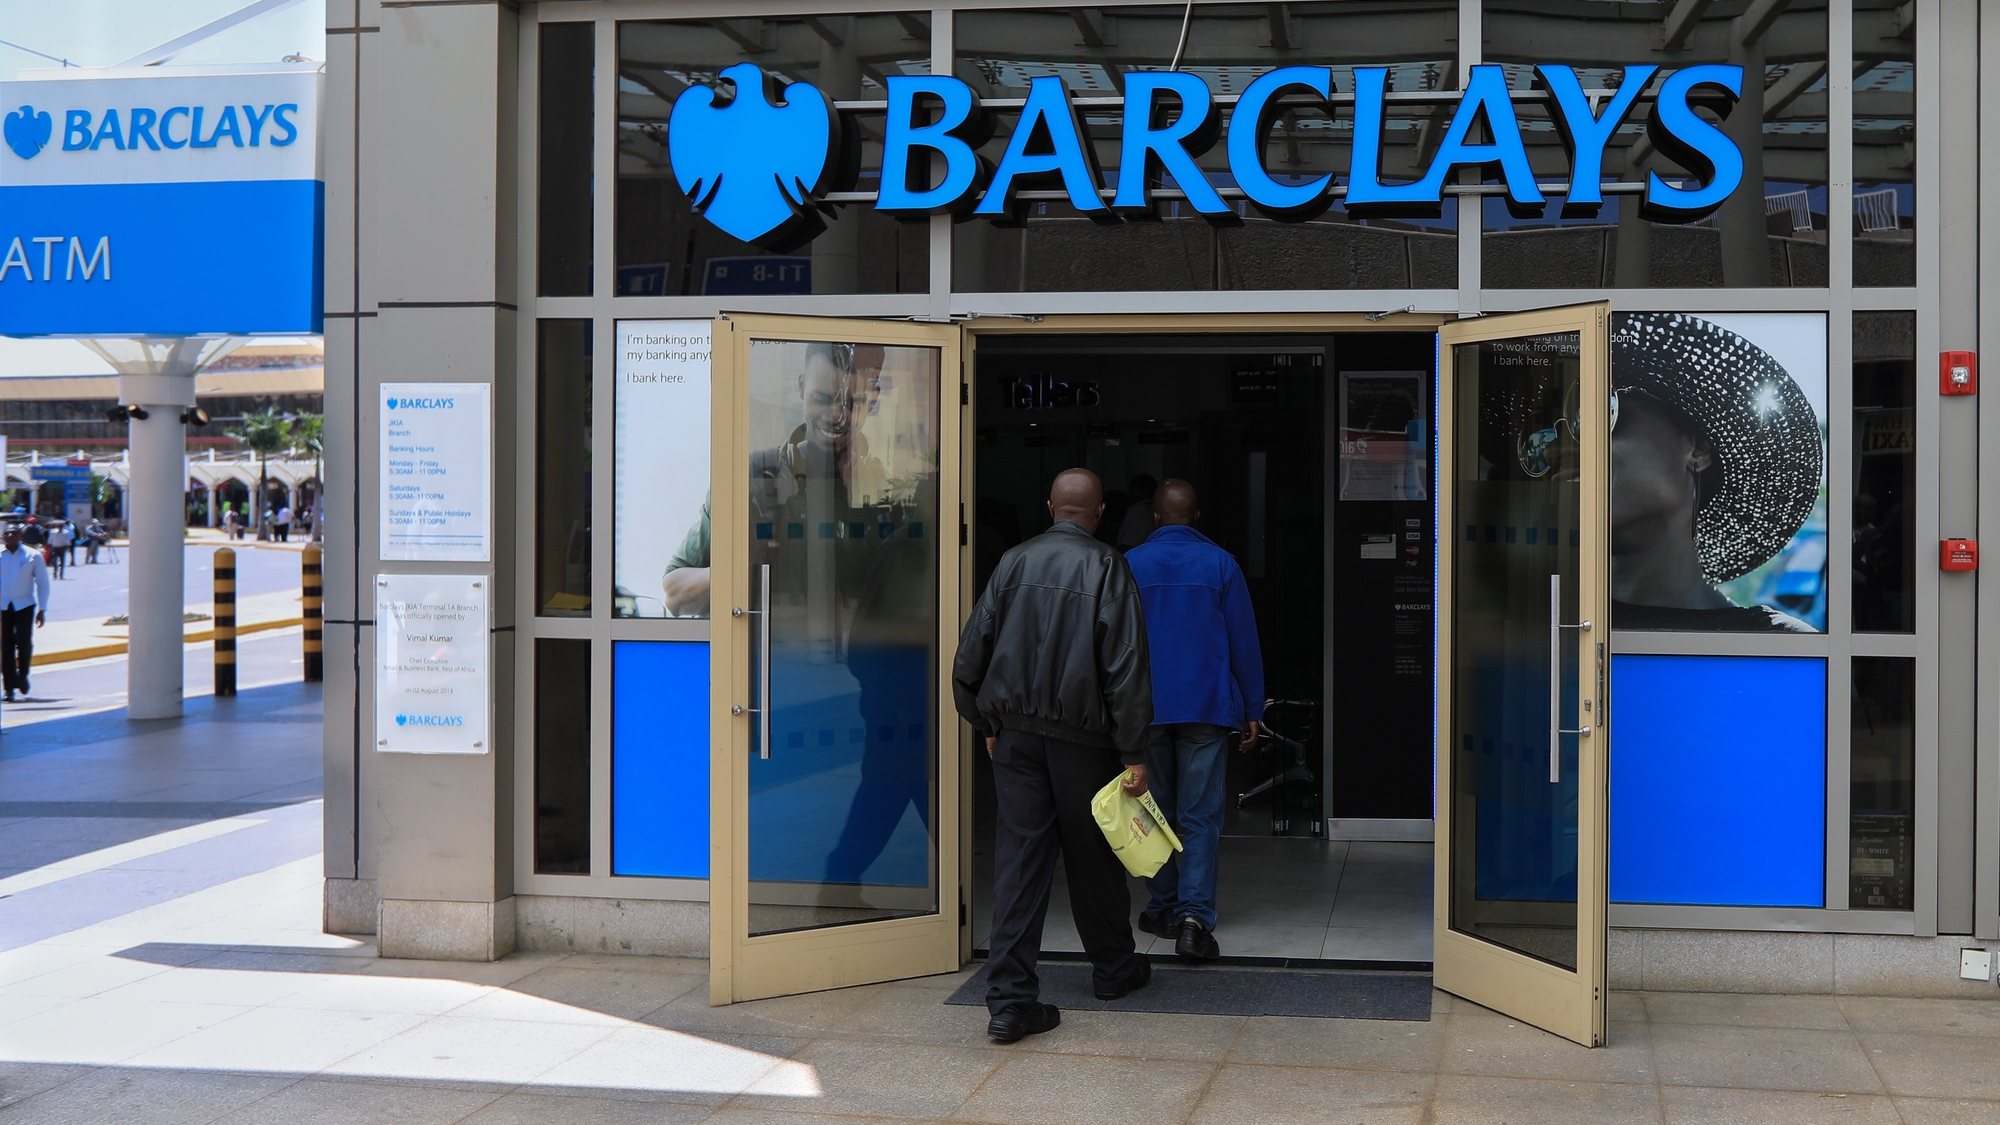 epa09017707 (FILE) - People enter into a Barclays bank branch located at the entrance of one of the international arrivals terminals at the Jomo Kenyatta International Airport (JKIA) in Nairobi, Kenya, 06 March 2019 (reissued 17 February 2021). Barclays is due to release its full year 2020 results on 17 February 2021.  EPA/DANIEL IRUNGU *** Local Caption *** 55871938